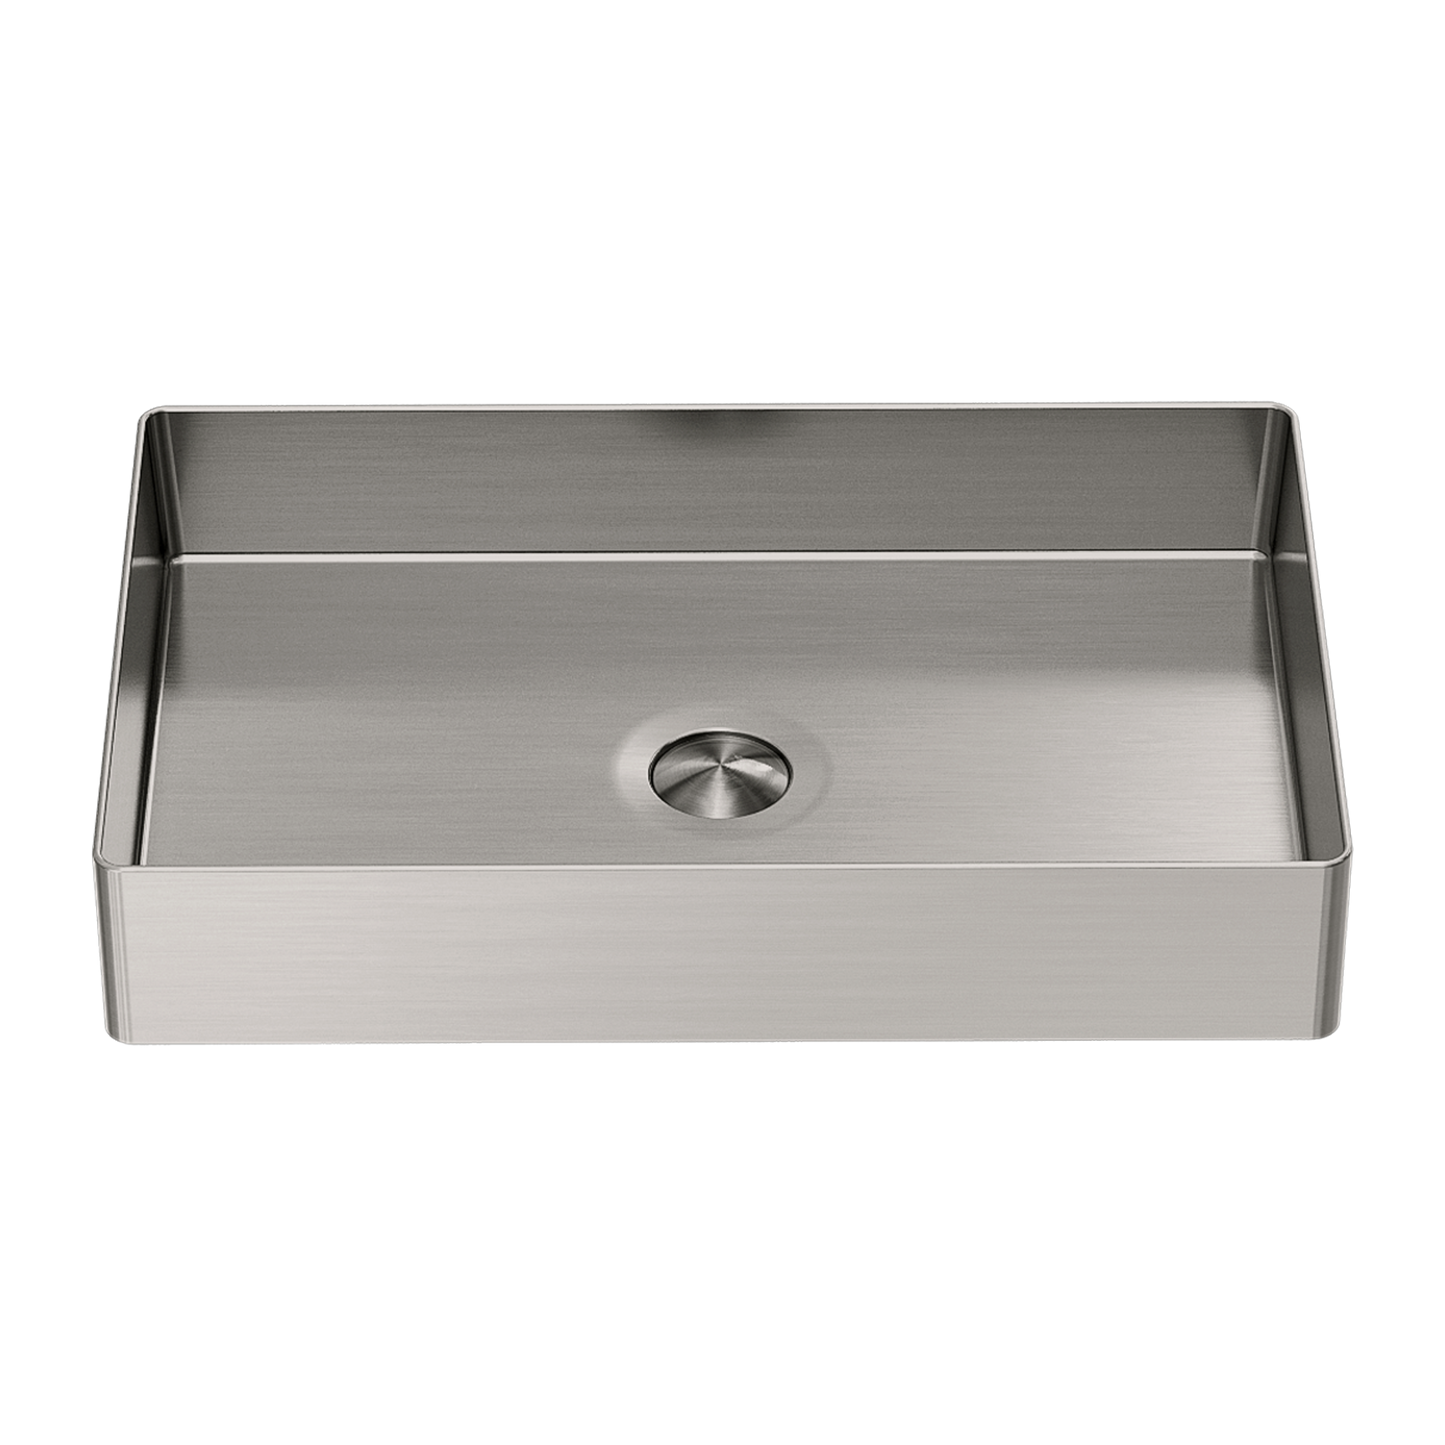 Stainless Steel Rectangle Counter Top Basin - Brushed Nickel with PVD Coating